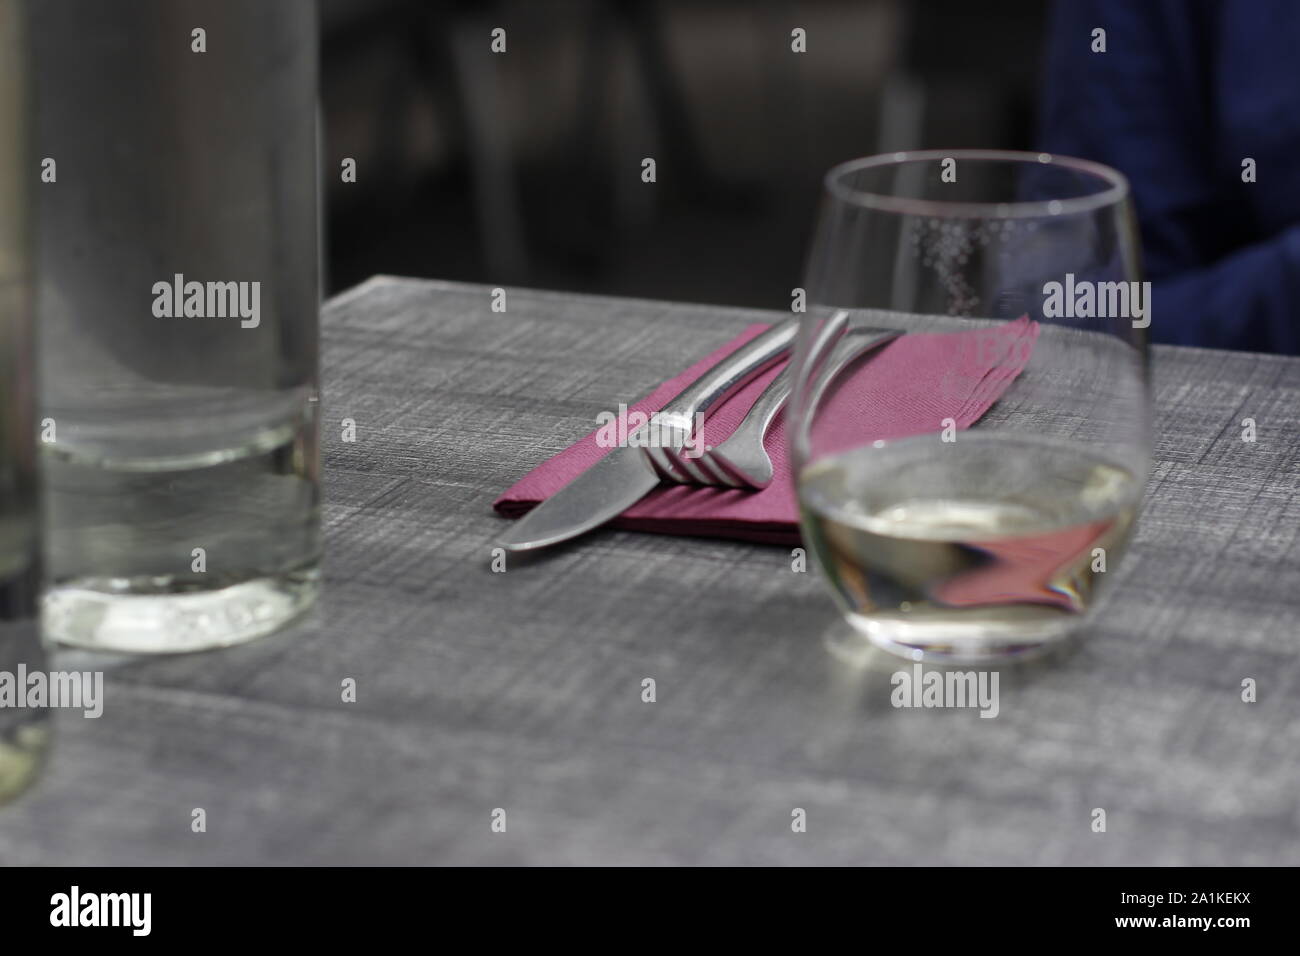 image showing a cafe or restaurant table setting including cutlery napkin and a glass of water and water bottle Stock Photo